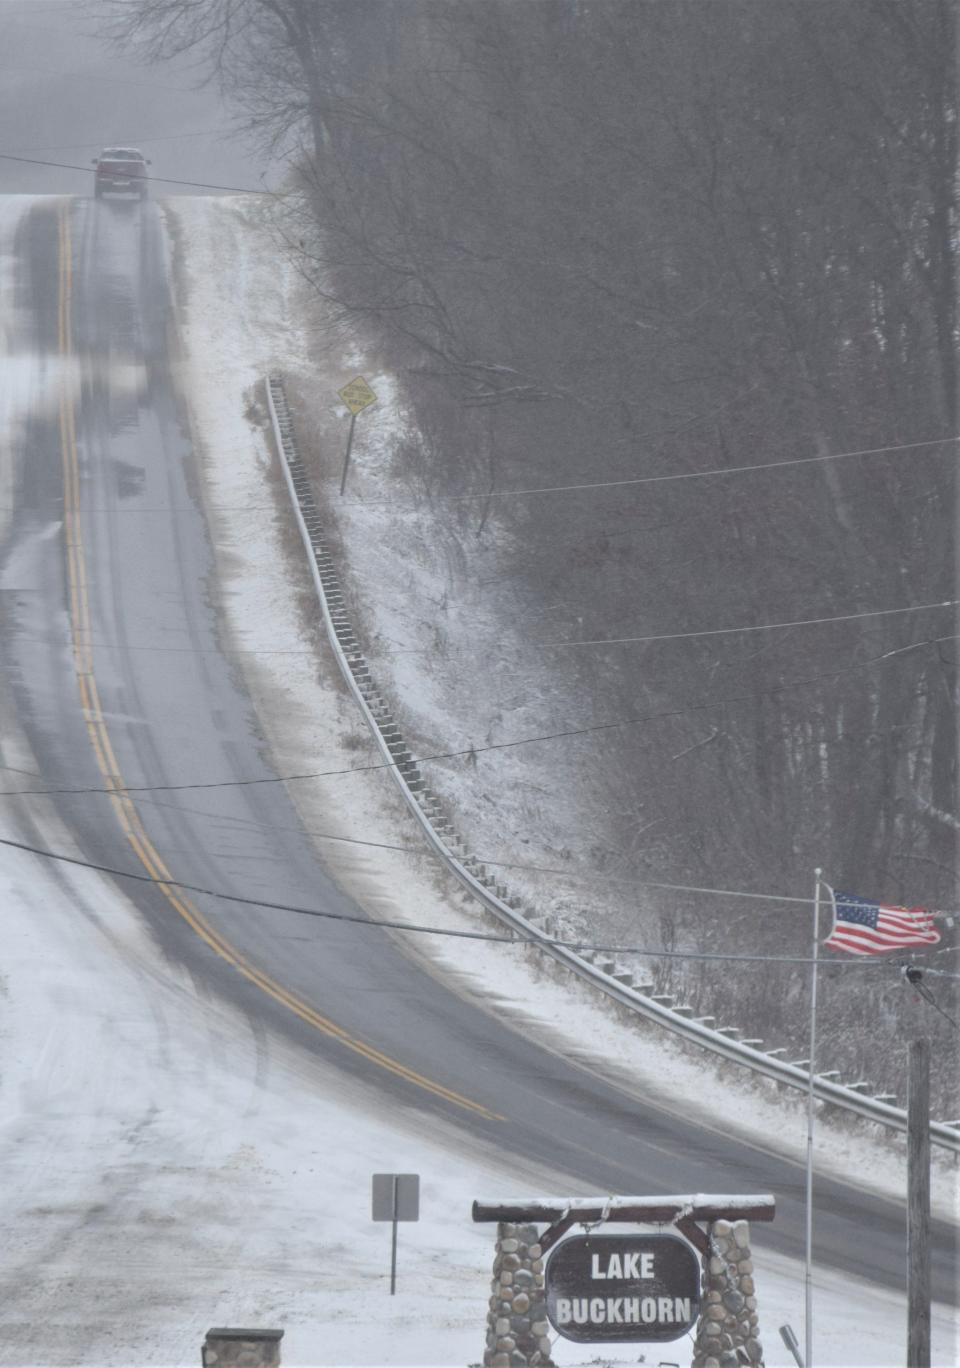 Wind gusts of better than 30 mph whipped the flag at the entrance to Lake Buckhorn as a lone vehicle makes its way along state Route 83 south of Millersburg.